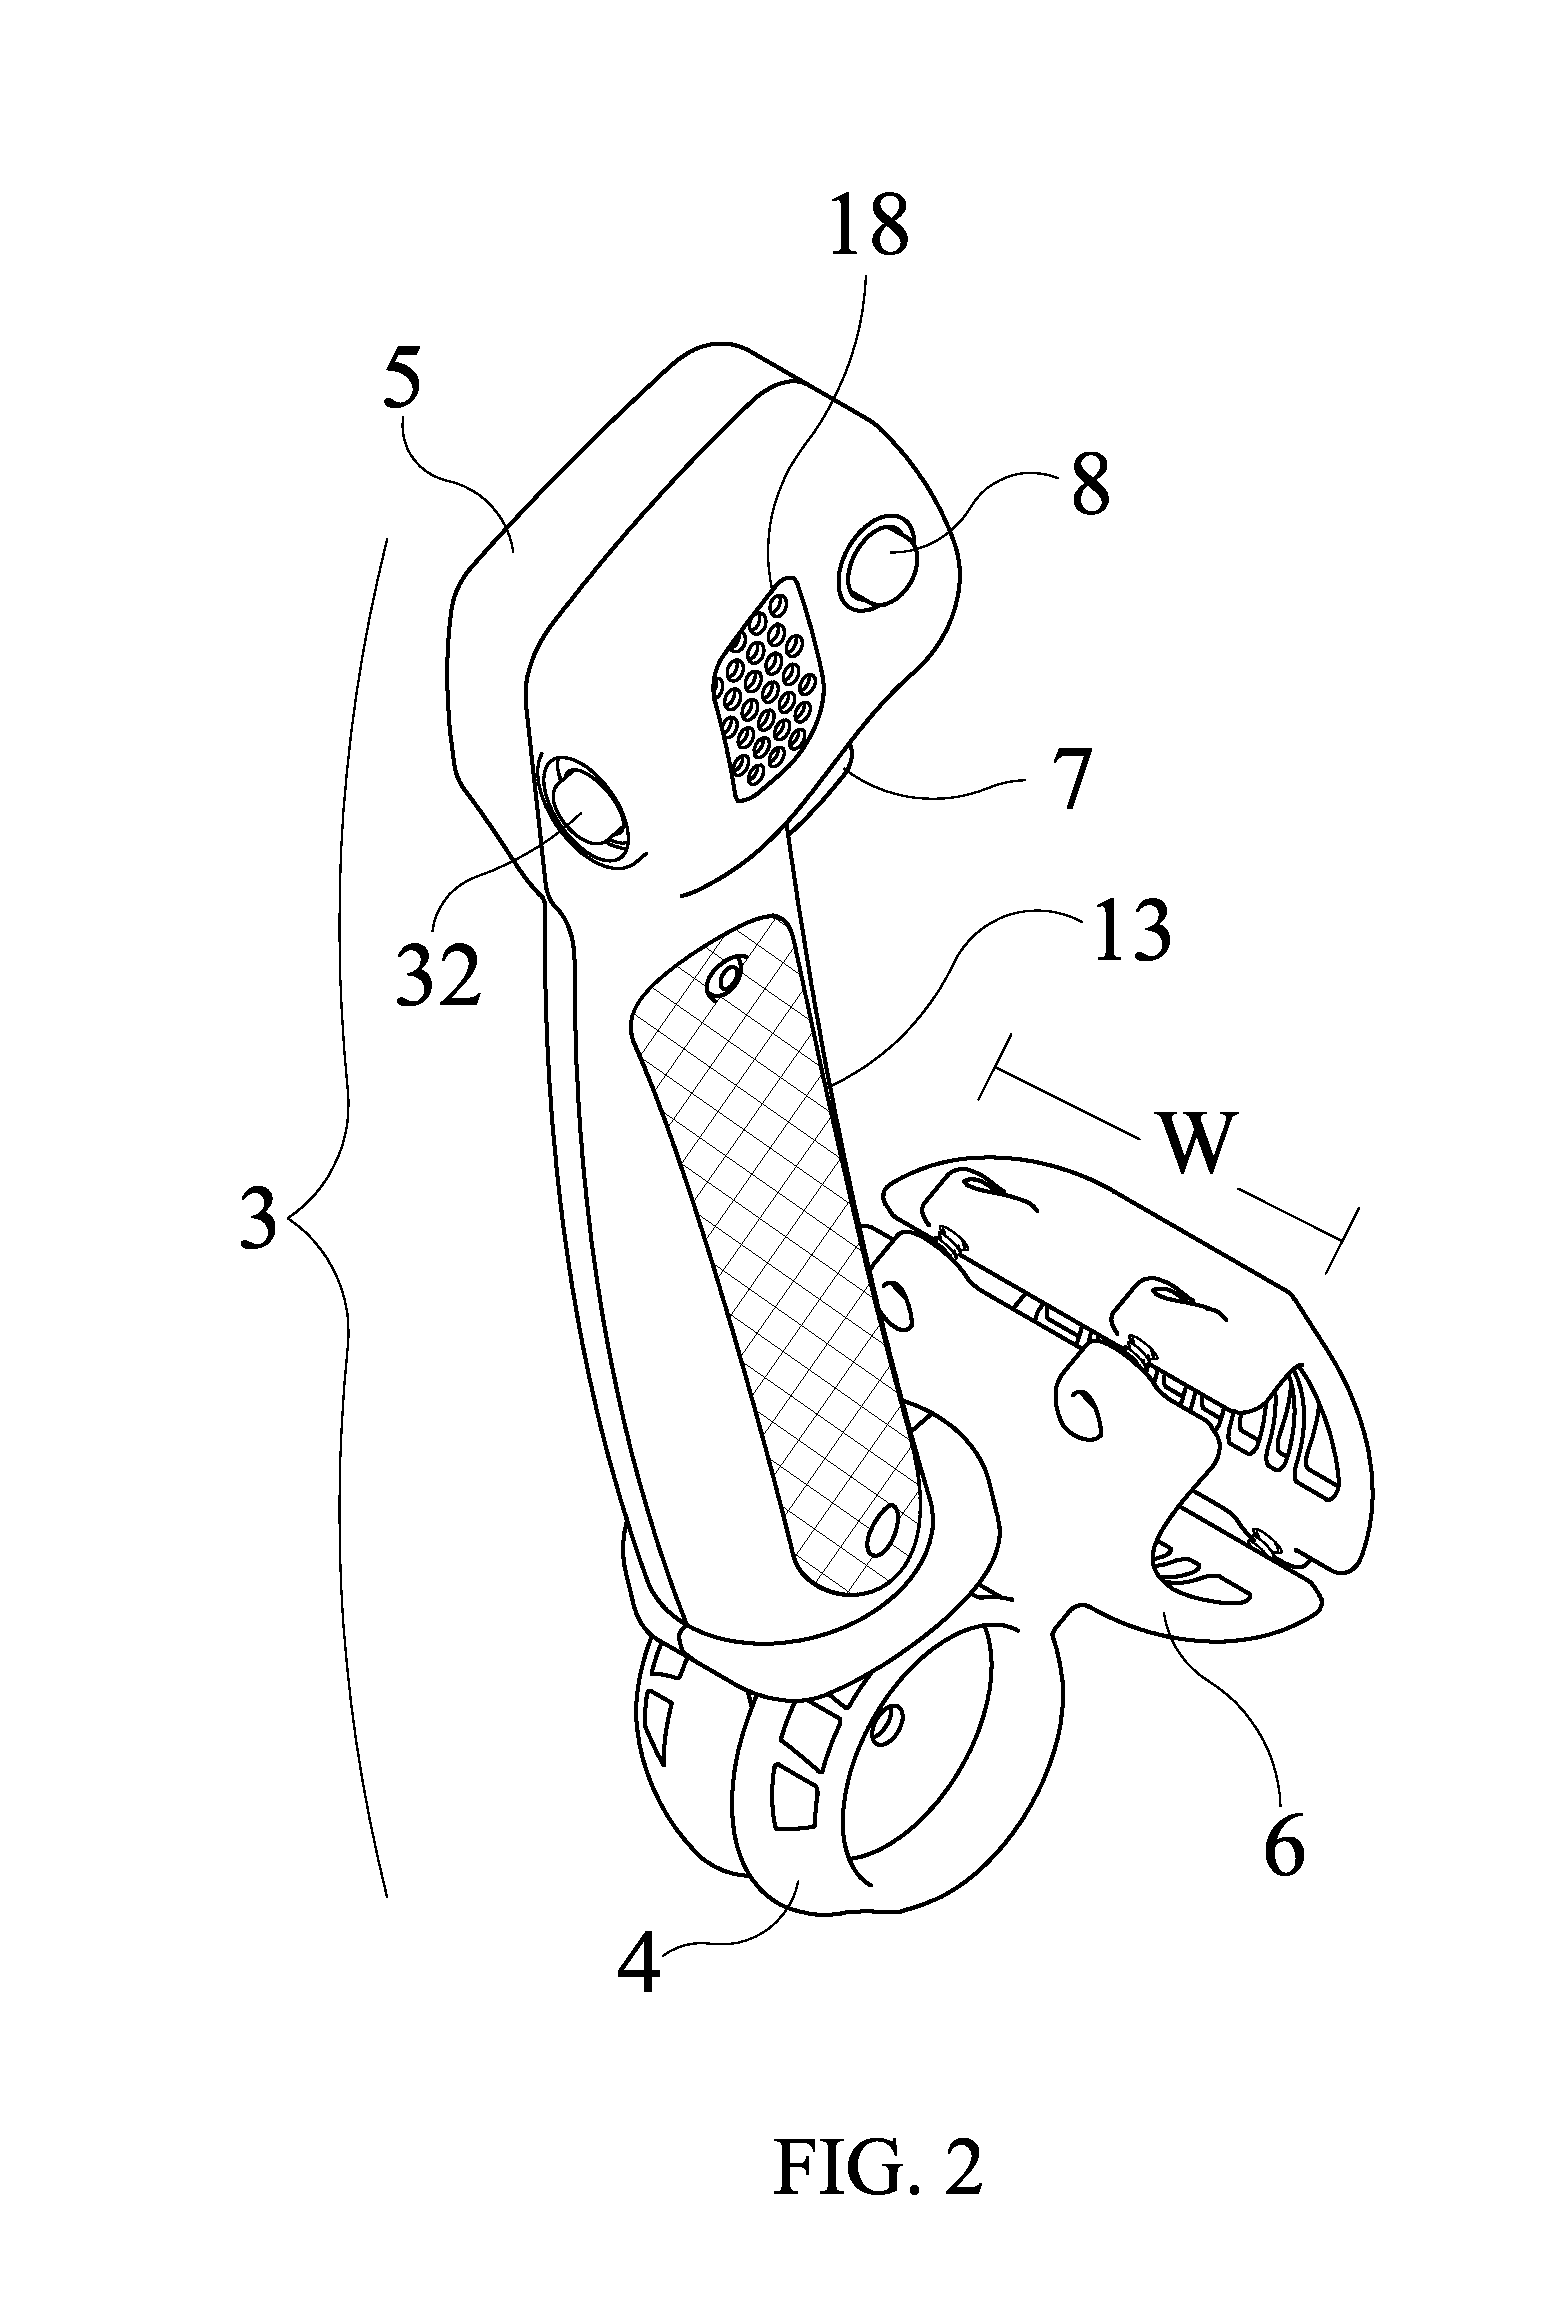 Thematic, Interactive, Adjustable Handle Extension For Wheeled Device